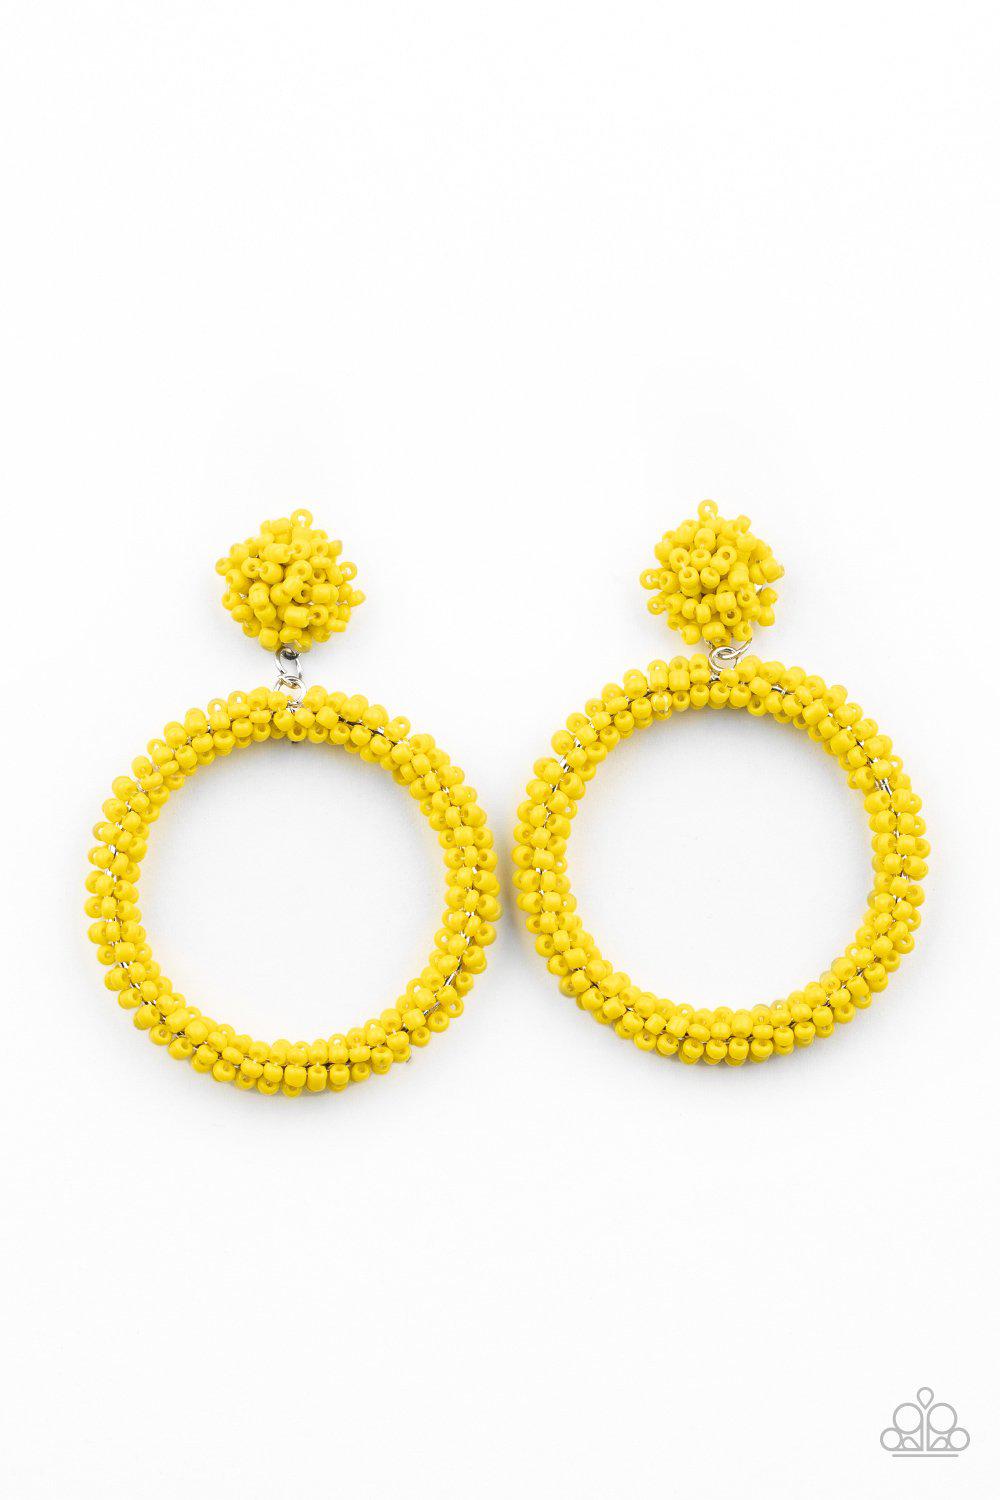 Be All You Can BEAD Yellow Seed Bead Earrings - Paparazzi Accessories- lightbox - CarasShop.com - $5 Jewelry by Cara Jewels